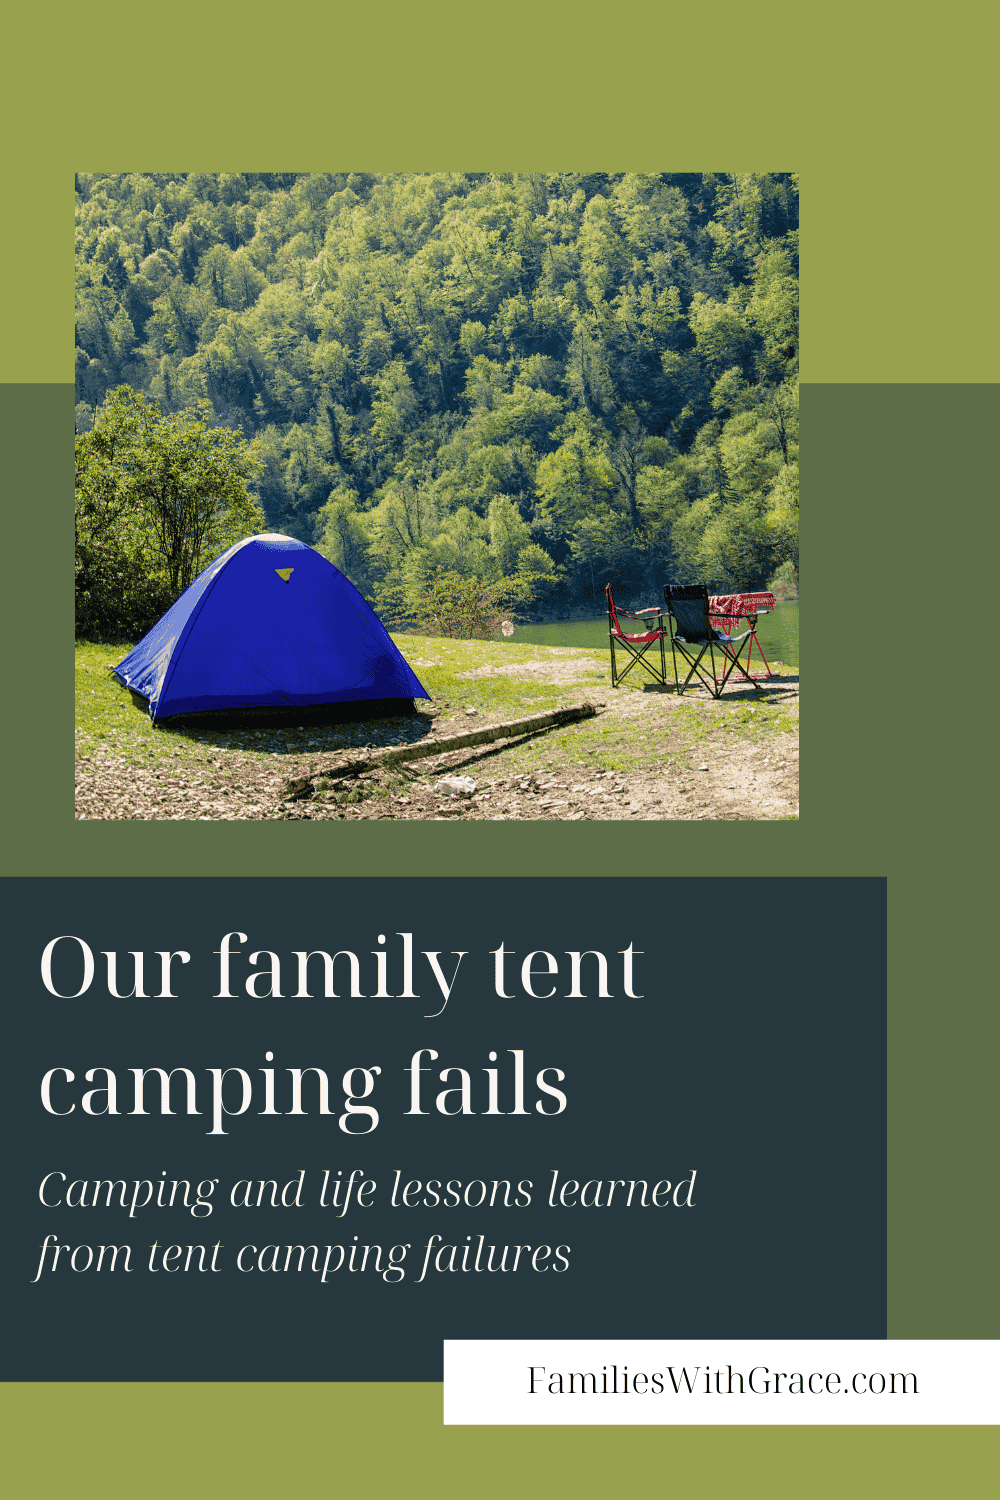 Our family tent camping fails